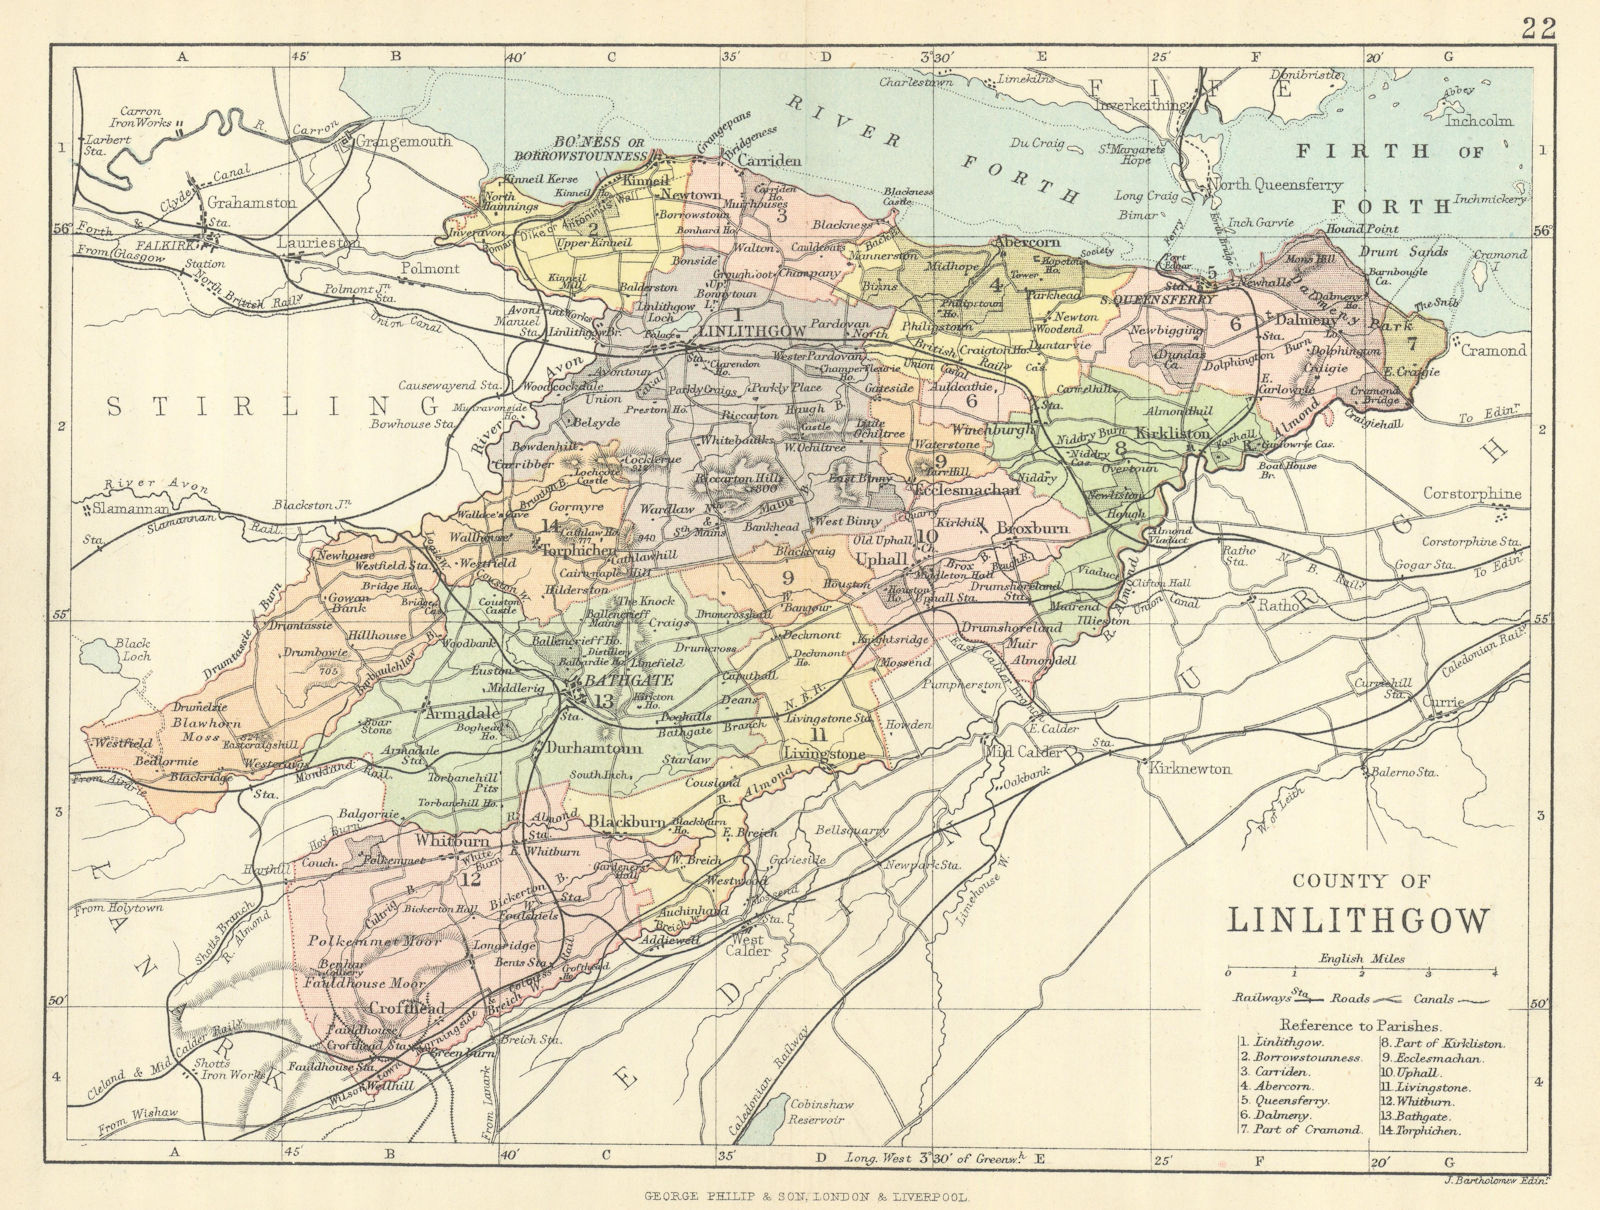 'County of Linlithgow'. Linlithgowshire. Parishes. BARTHOLOMEW 1886 old map